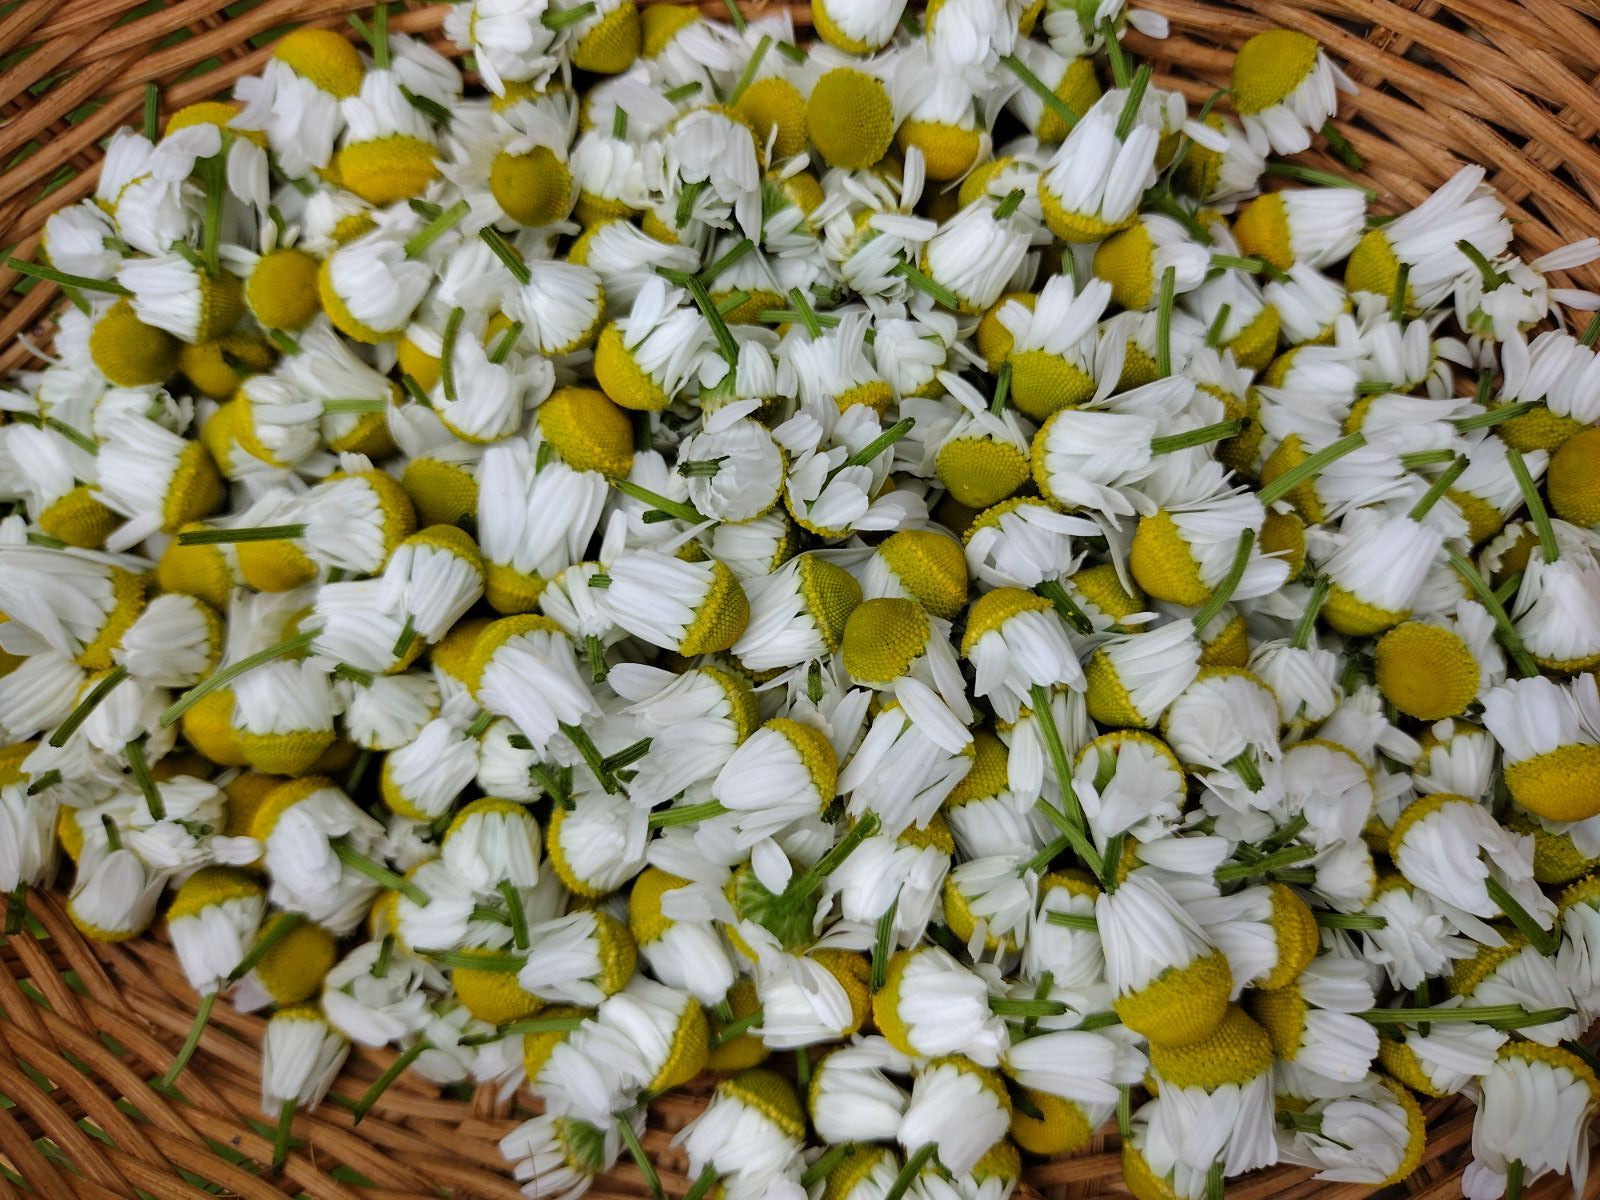 Close-up view of German chamomile blossoms in a rustic wicker basket, showcasing their delicate white petals and sunny yellow disks.